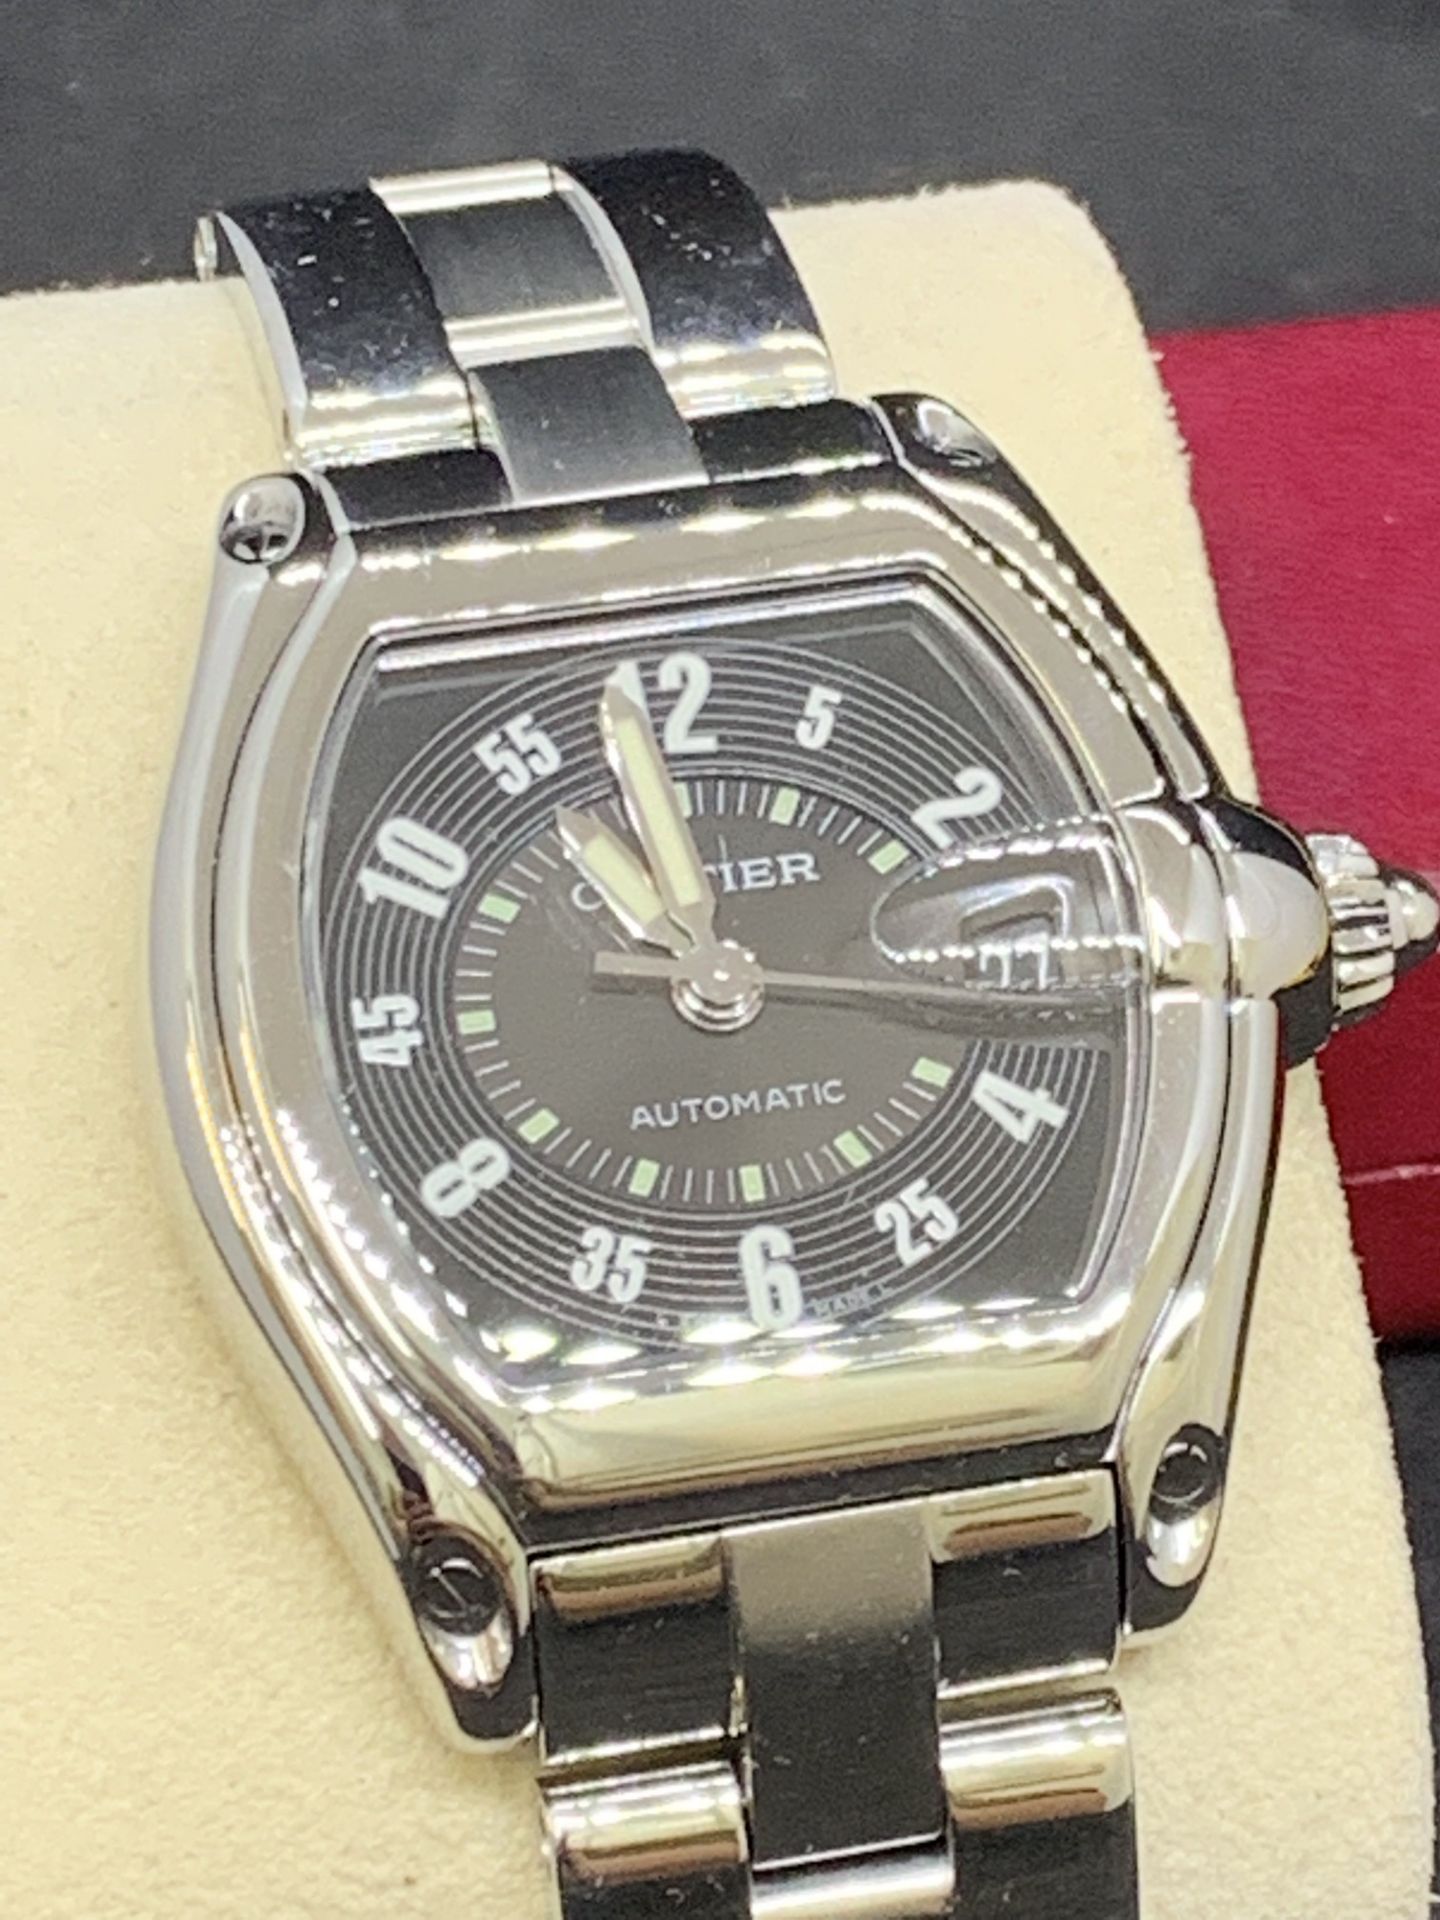 CARTIER ROADSTER AUTOMATIC STAINLESS STEEL WATCH - Image 3 of 9